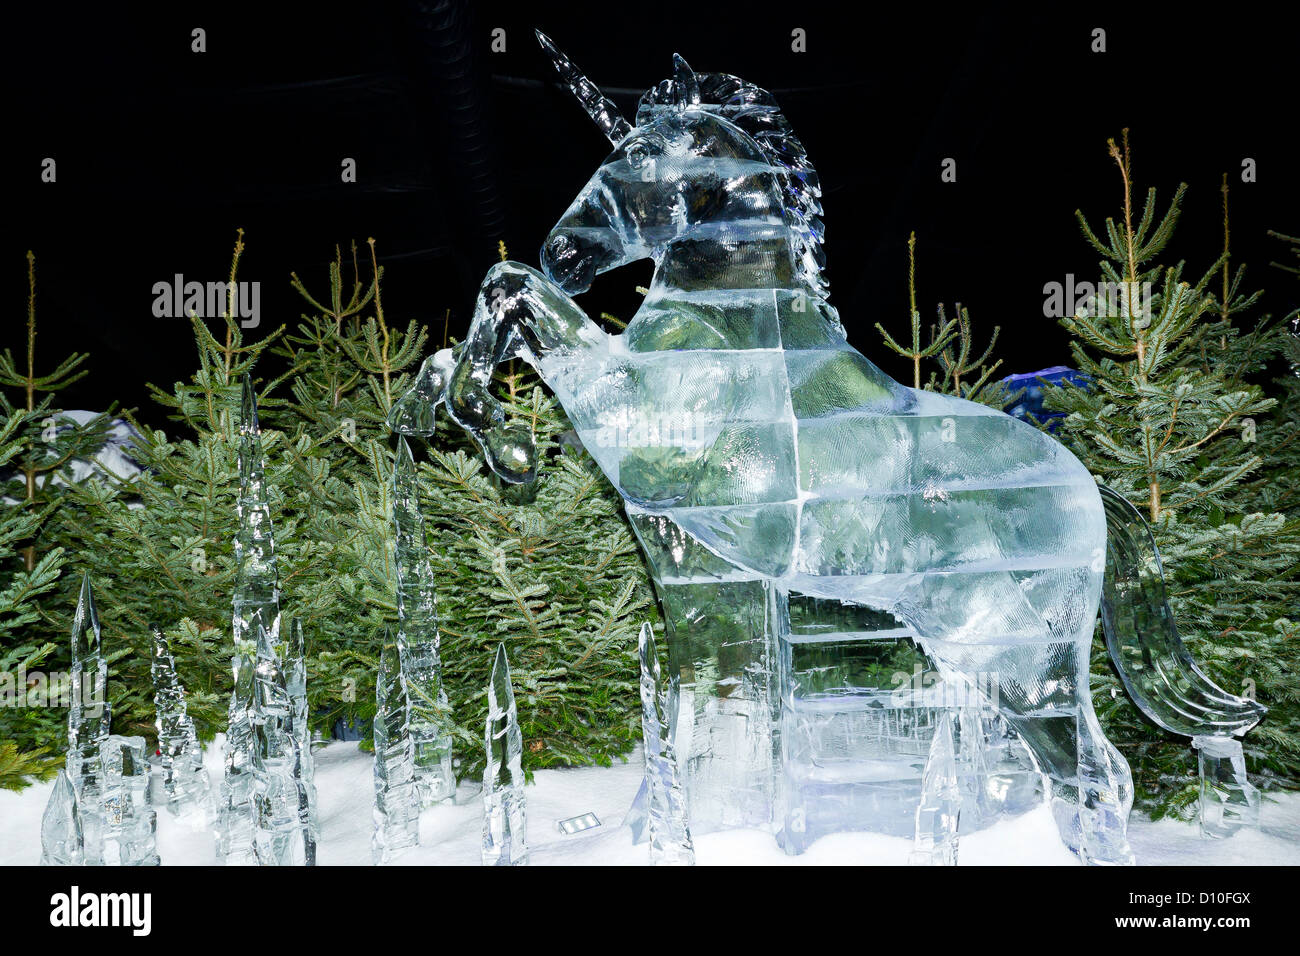 Carved Ice Sculpture Of A Unicorn In The ice Kingdom At The Winter Wonderland Hyde Park London, England, UK Stock Photo